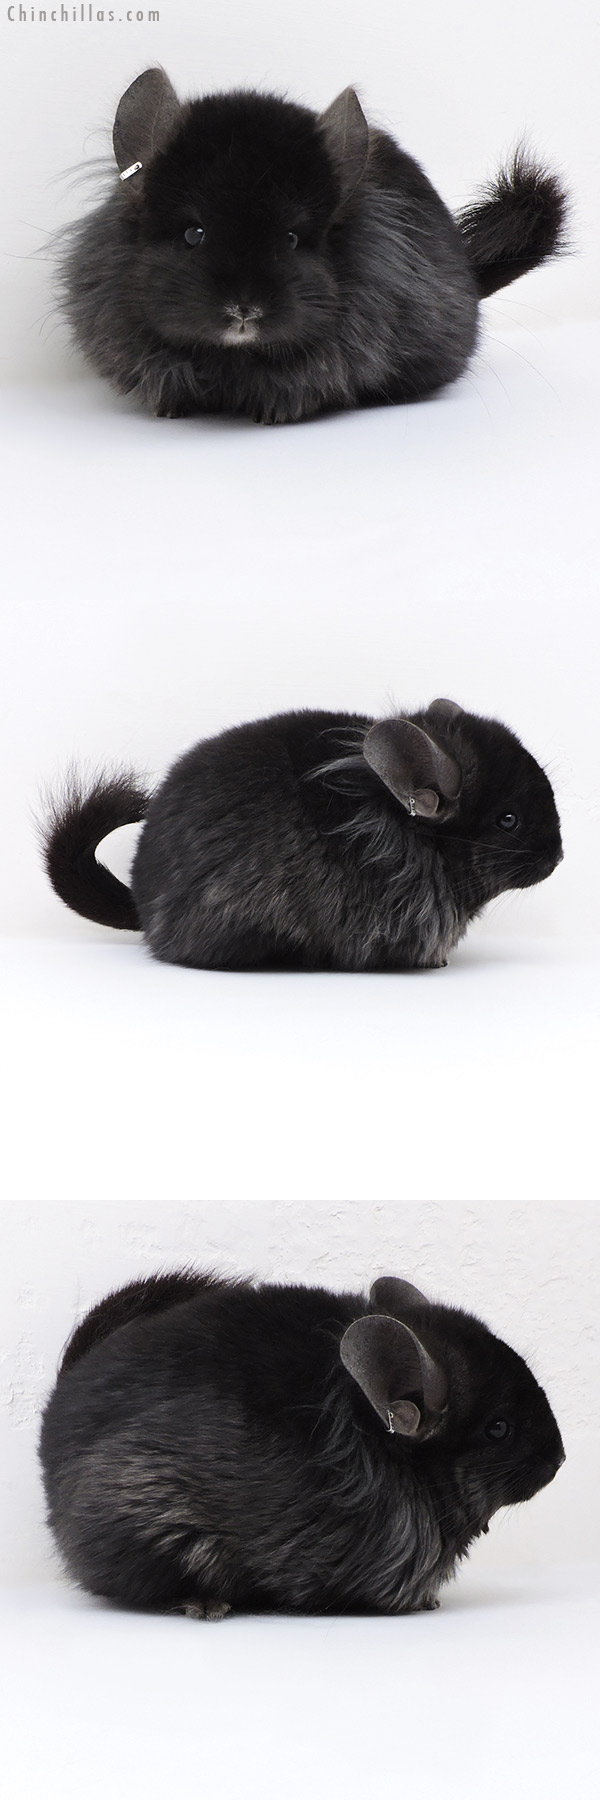 Chinchilla or related item offered for sale or export on Chinchillas.com - 18006 Exceptional Ebony G2  Royal Persian Angora ( Locken Carrier ) Female Chinchilla